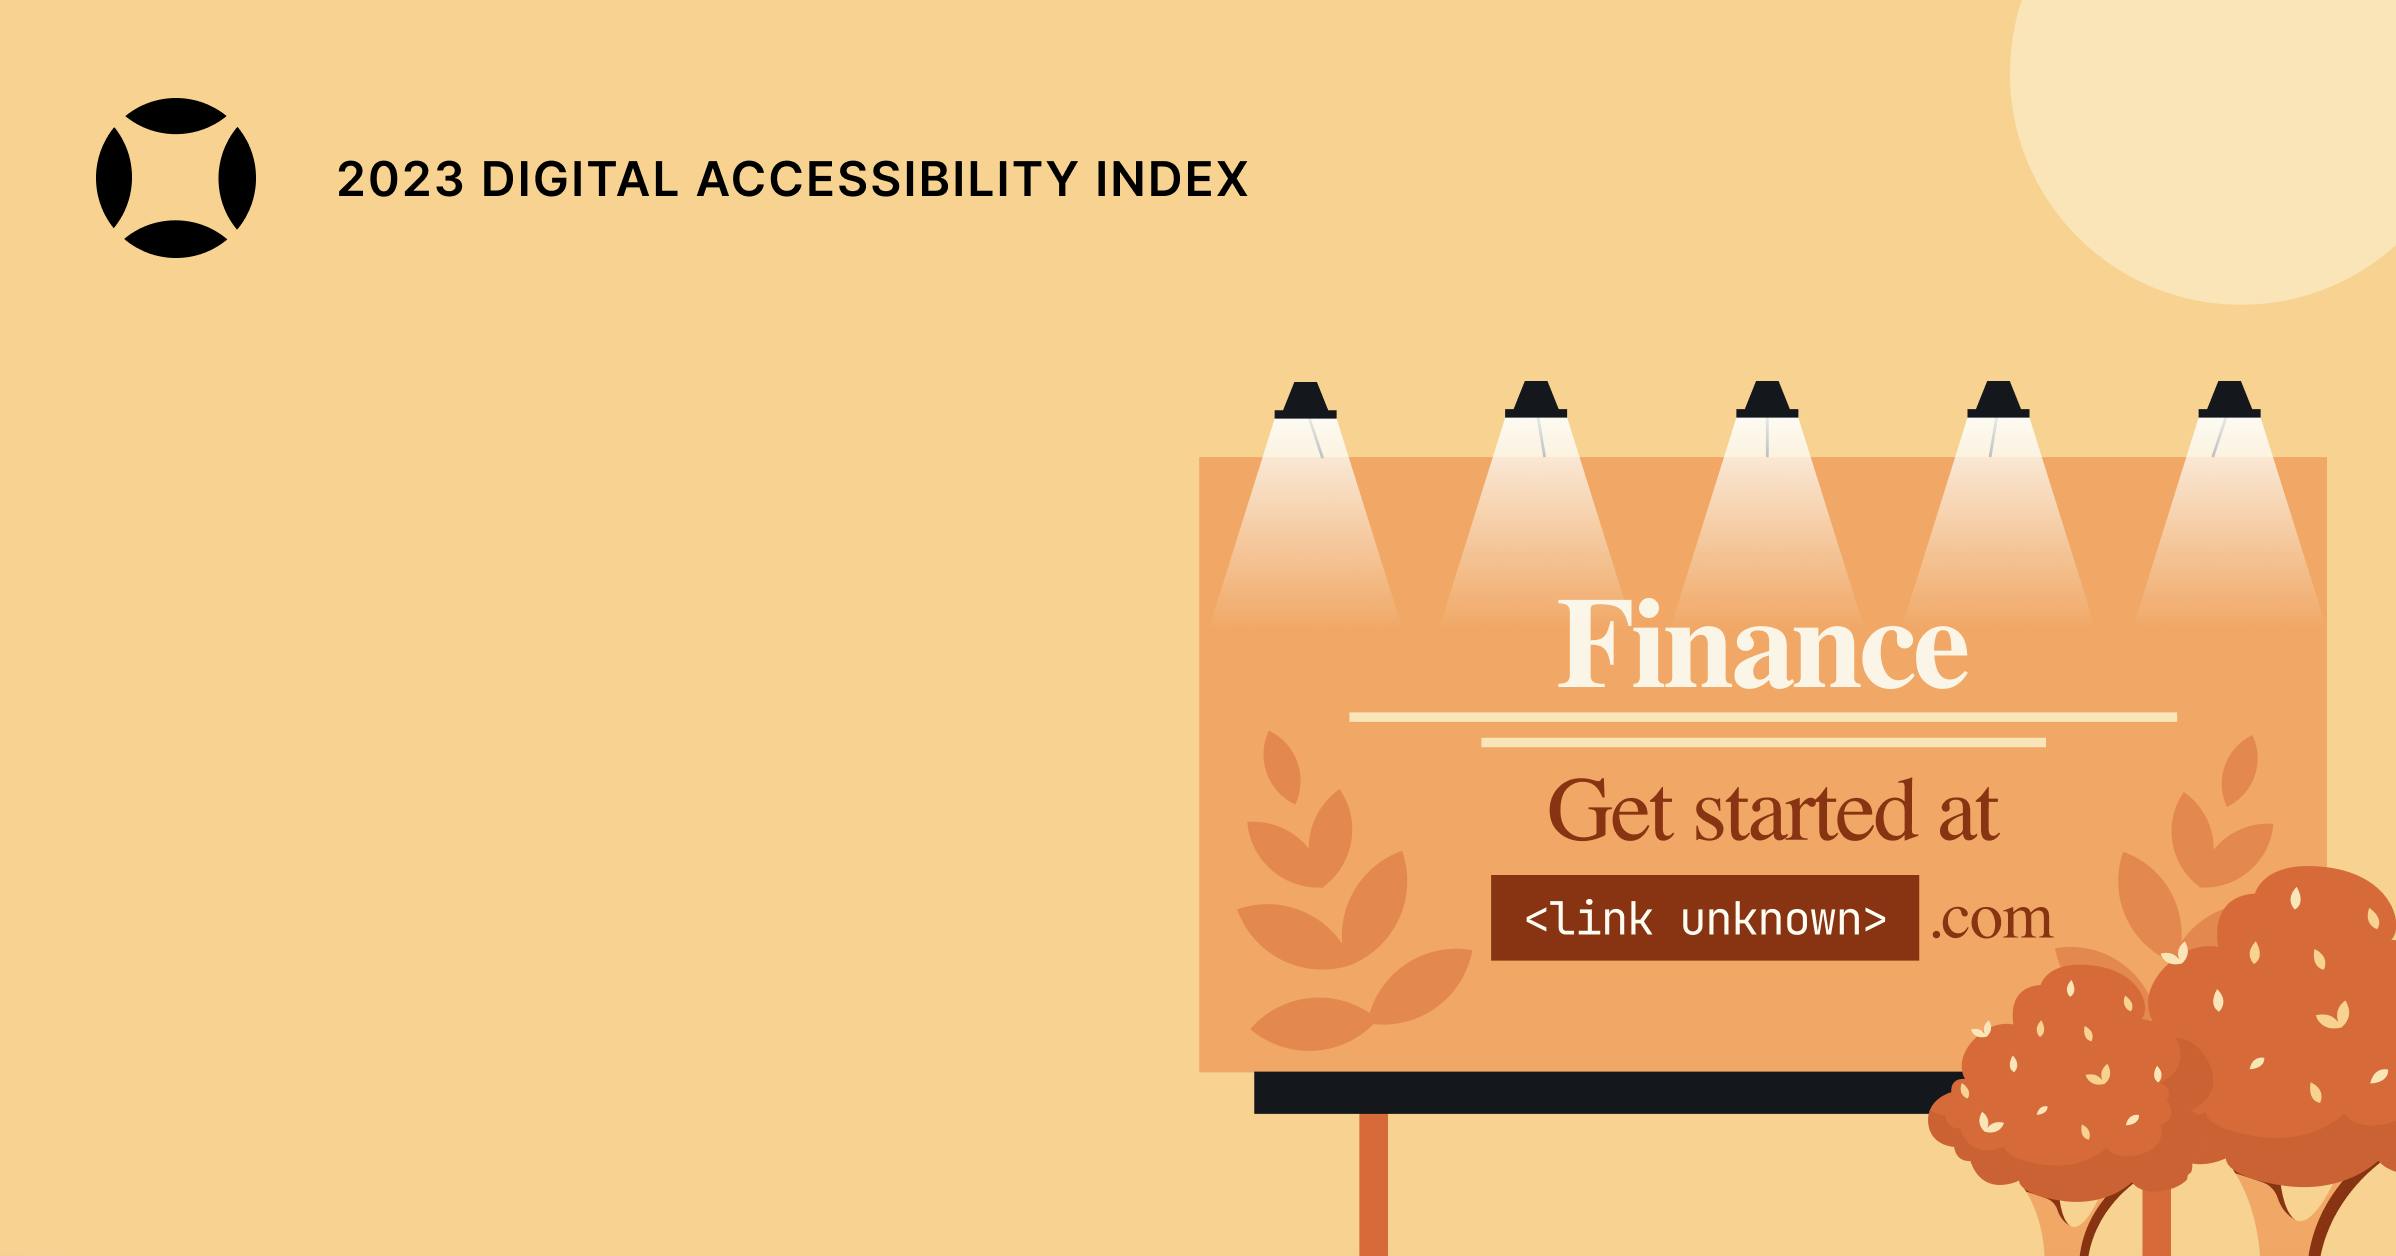 Orange and yellow illustration of a billboard that says "Finance: Get started at <link unknown>.com." In the top-left corner is the AudioEye logo and a label that reads "2023 Digital Accessibility Index."